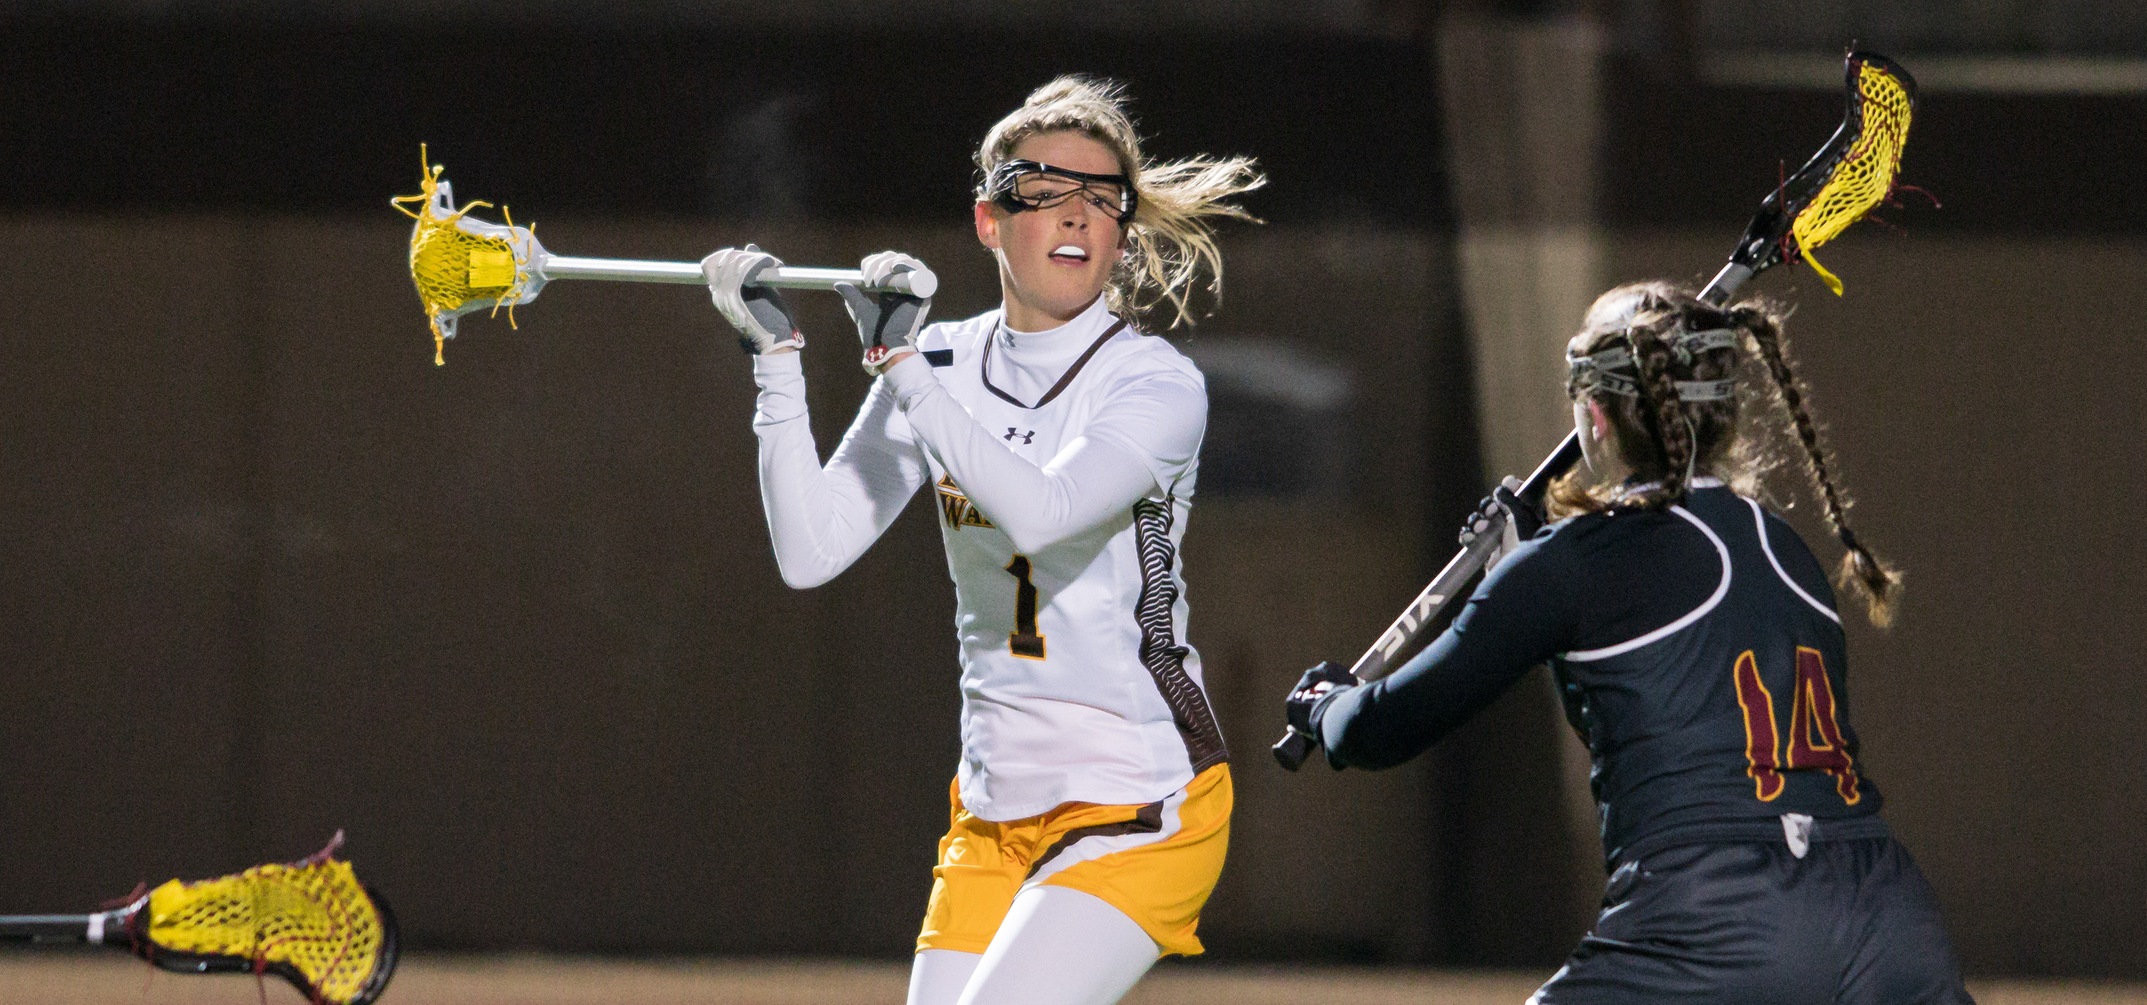 Junior All-OAC attack Brie Martineau had three goals and three assists in BW's close 9-8 win over John Carroll (Photo courtesy of Jesse Kucewicz)